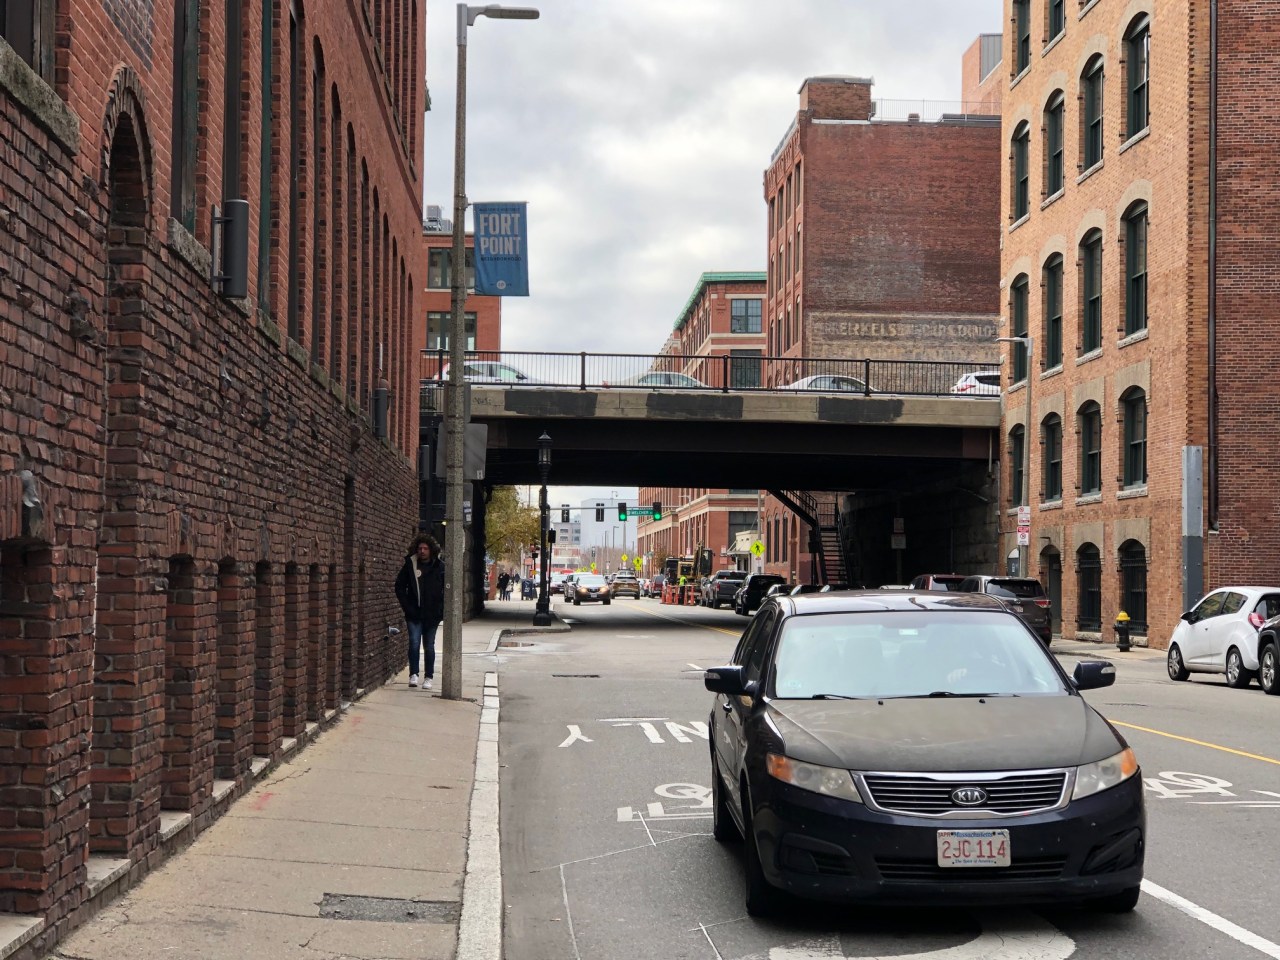 A city street with extremely narrow sidewalks obstructed by lightposts. Historic brick warehouse buildings line both sides of the street. In the distance is an viaduct carrying another street overhead.